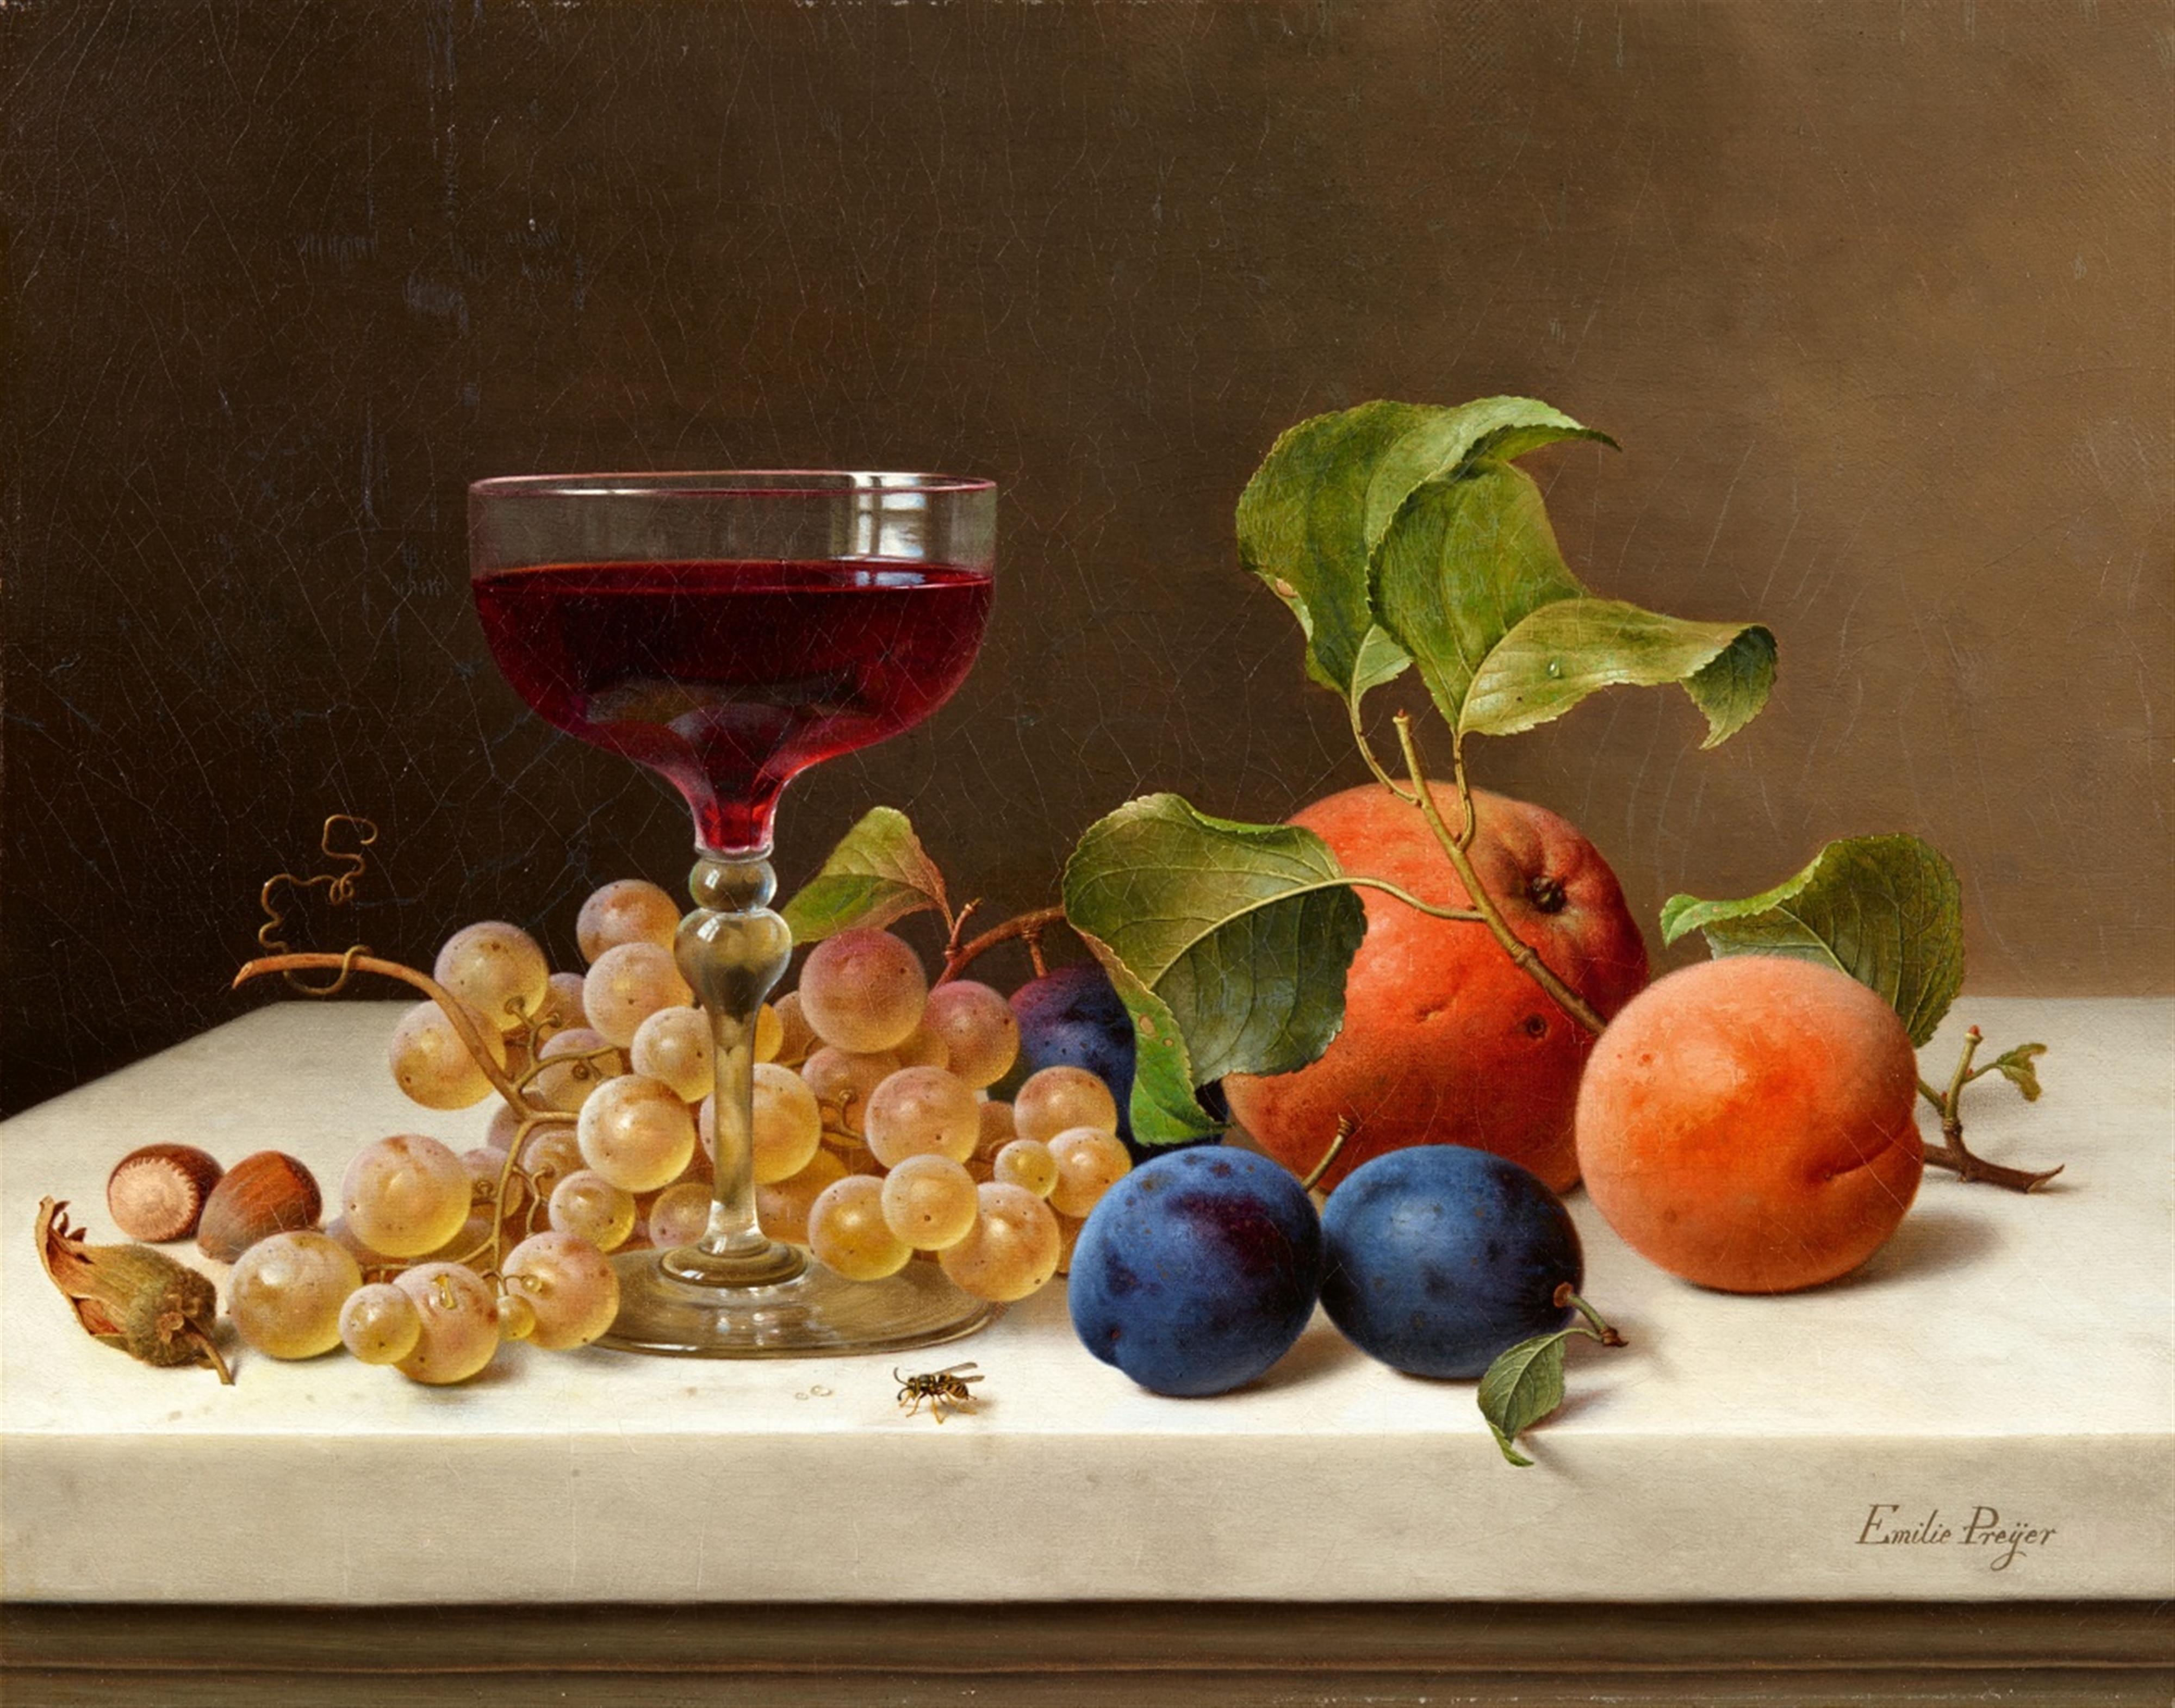 Emilie Preyer - Still Life with Fruit, Nuts, and a Glass of Wine - image-1